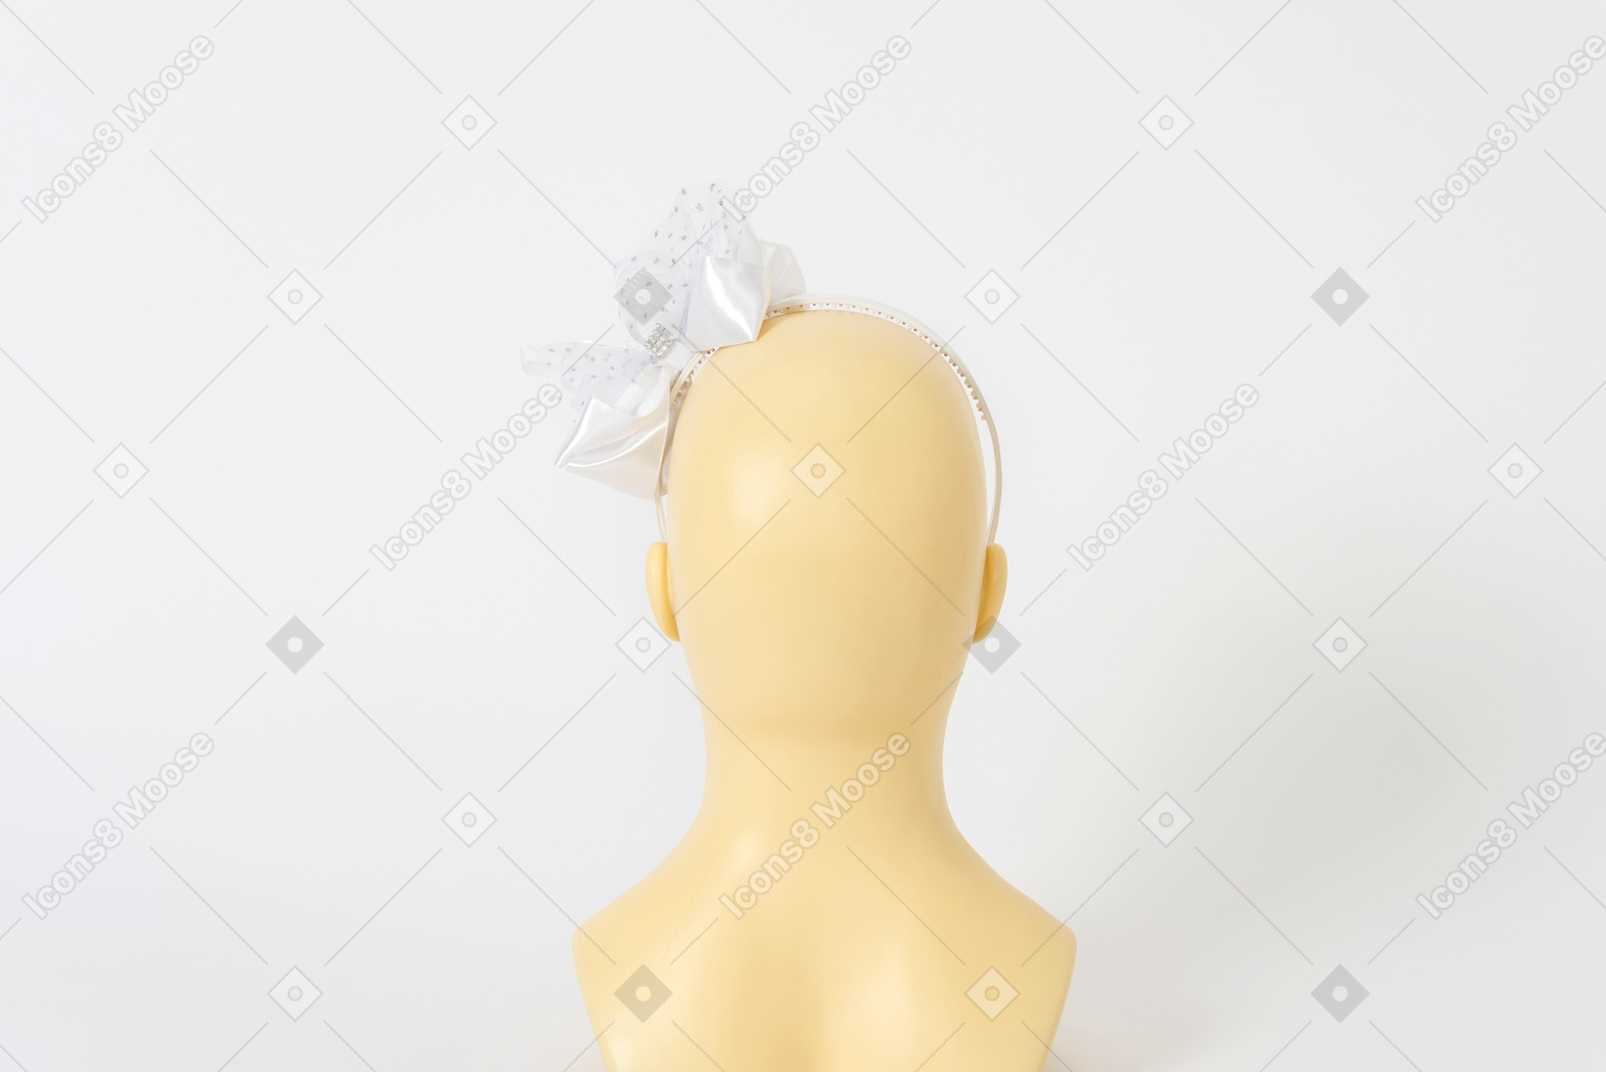 White hairband with a bow on a mannequin head